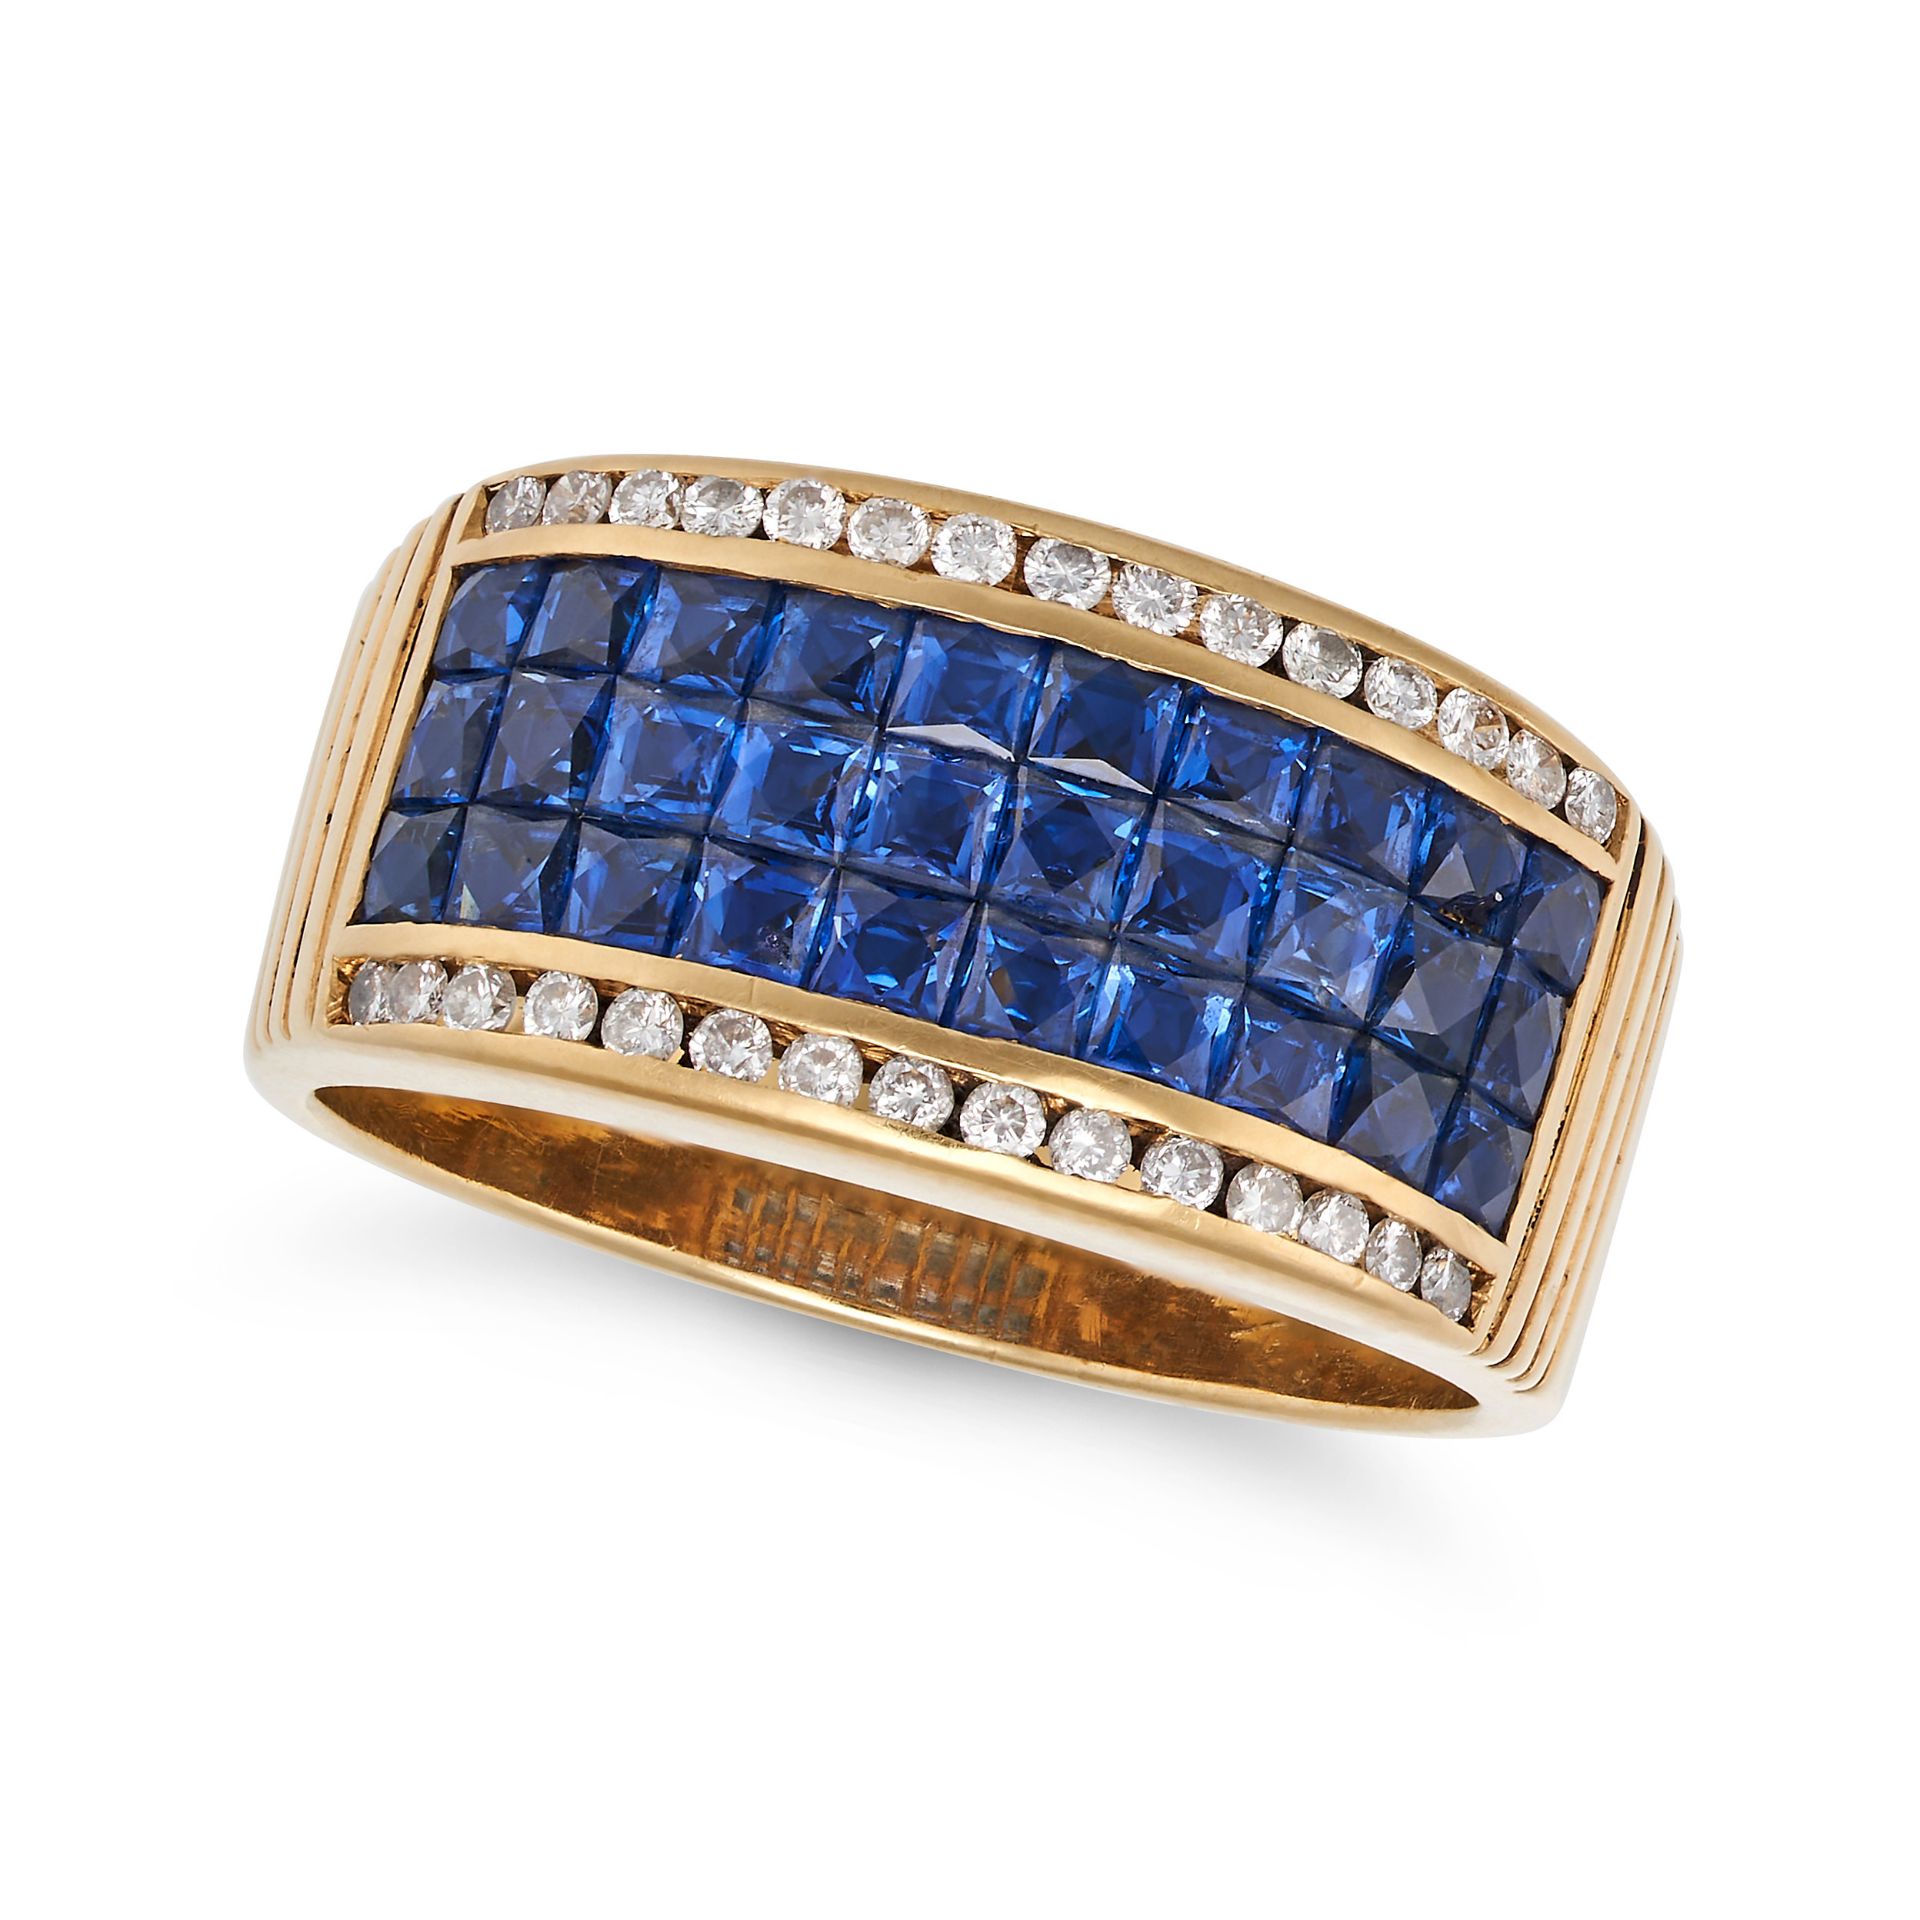 A SAPPHIRE AND DIAMOND DRESS RING in 18ct yellow gold, invisibly set with three rows of French cu...